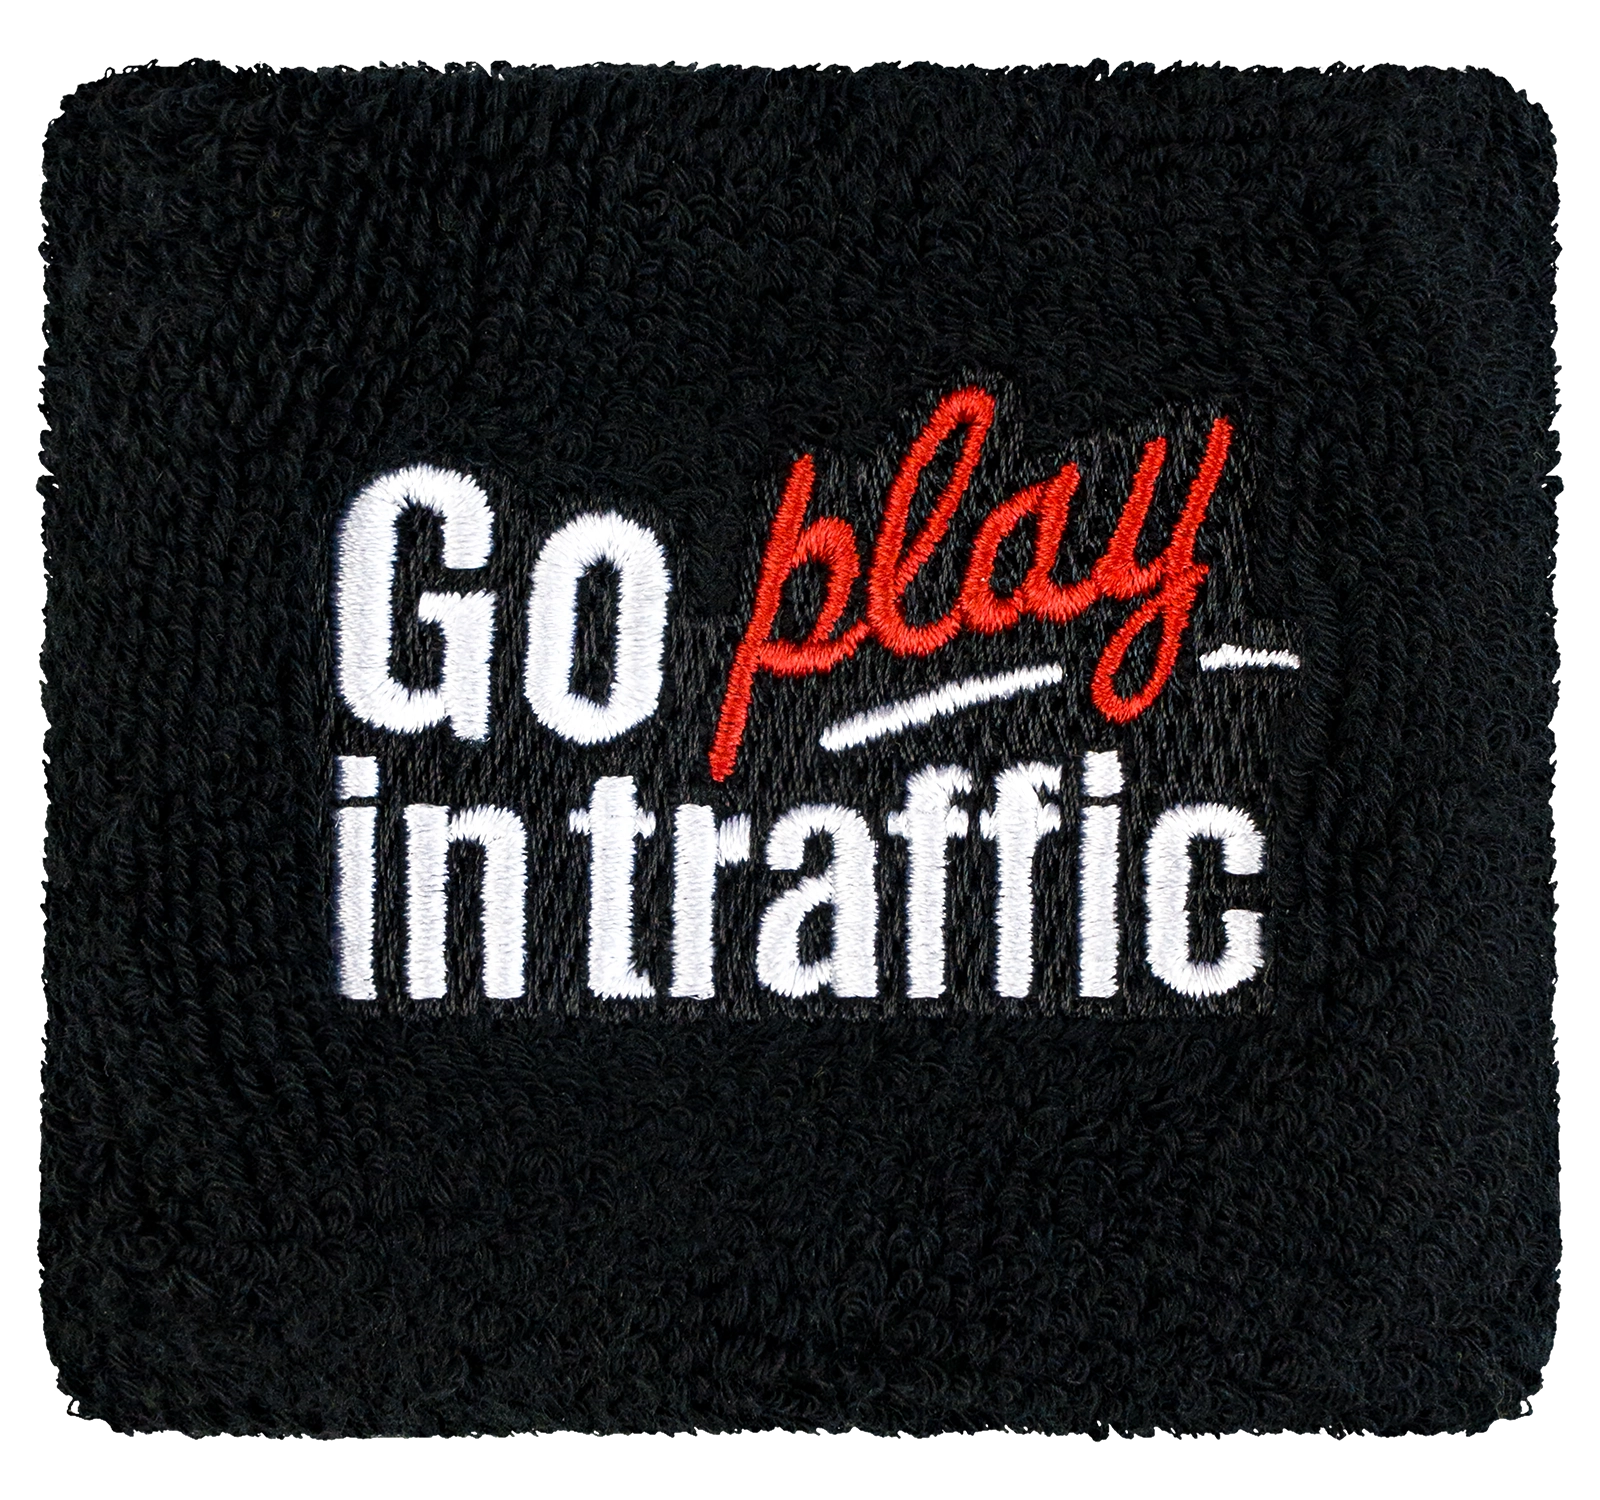 Go Play In Traffic - Reservoir Cover